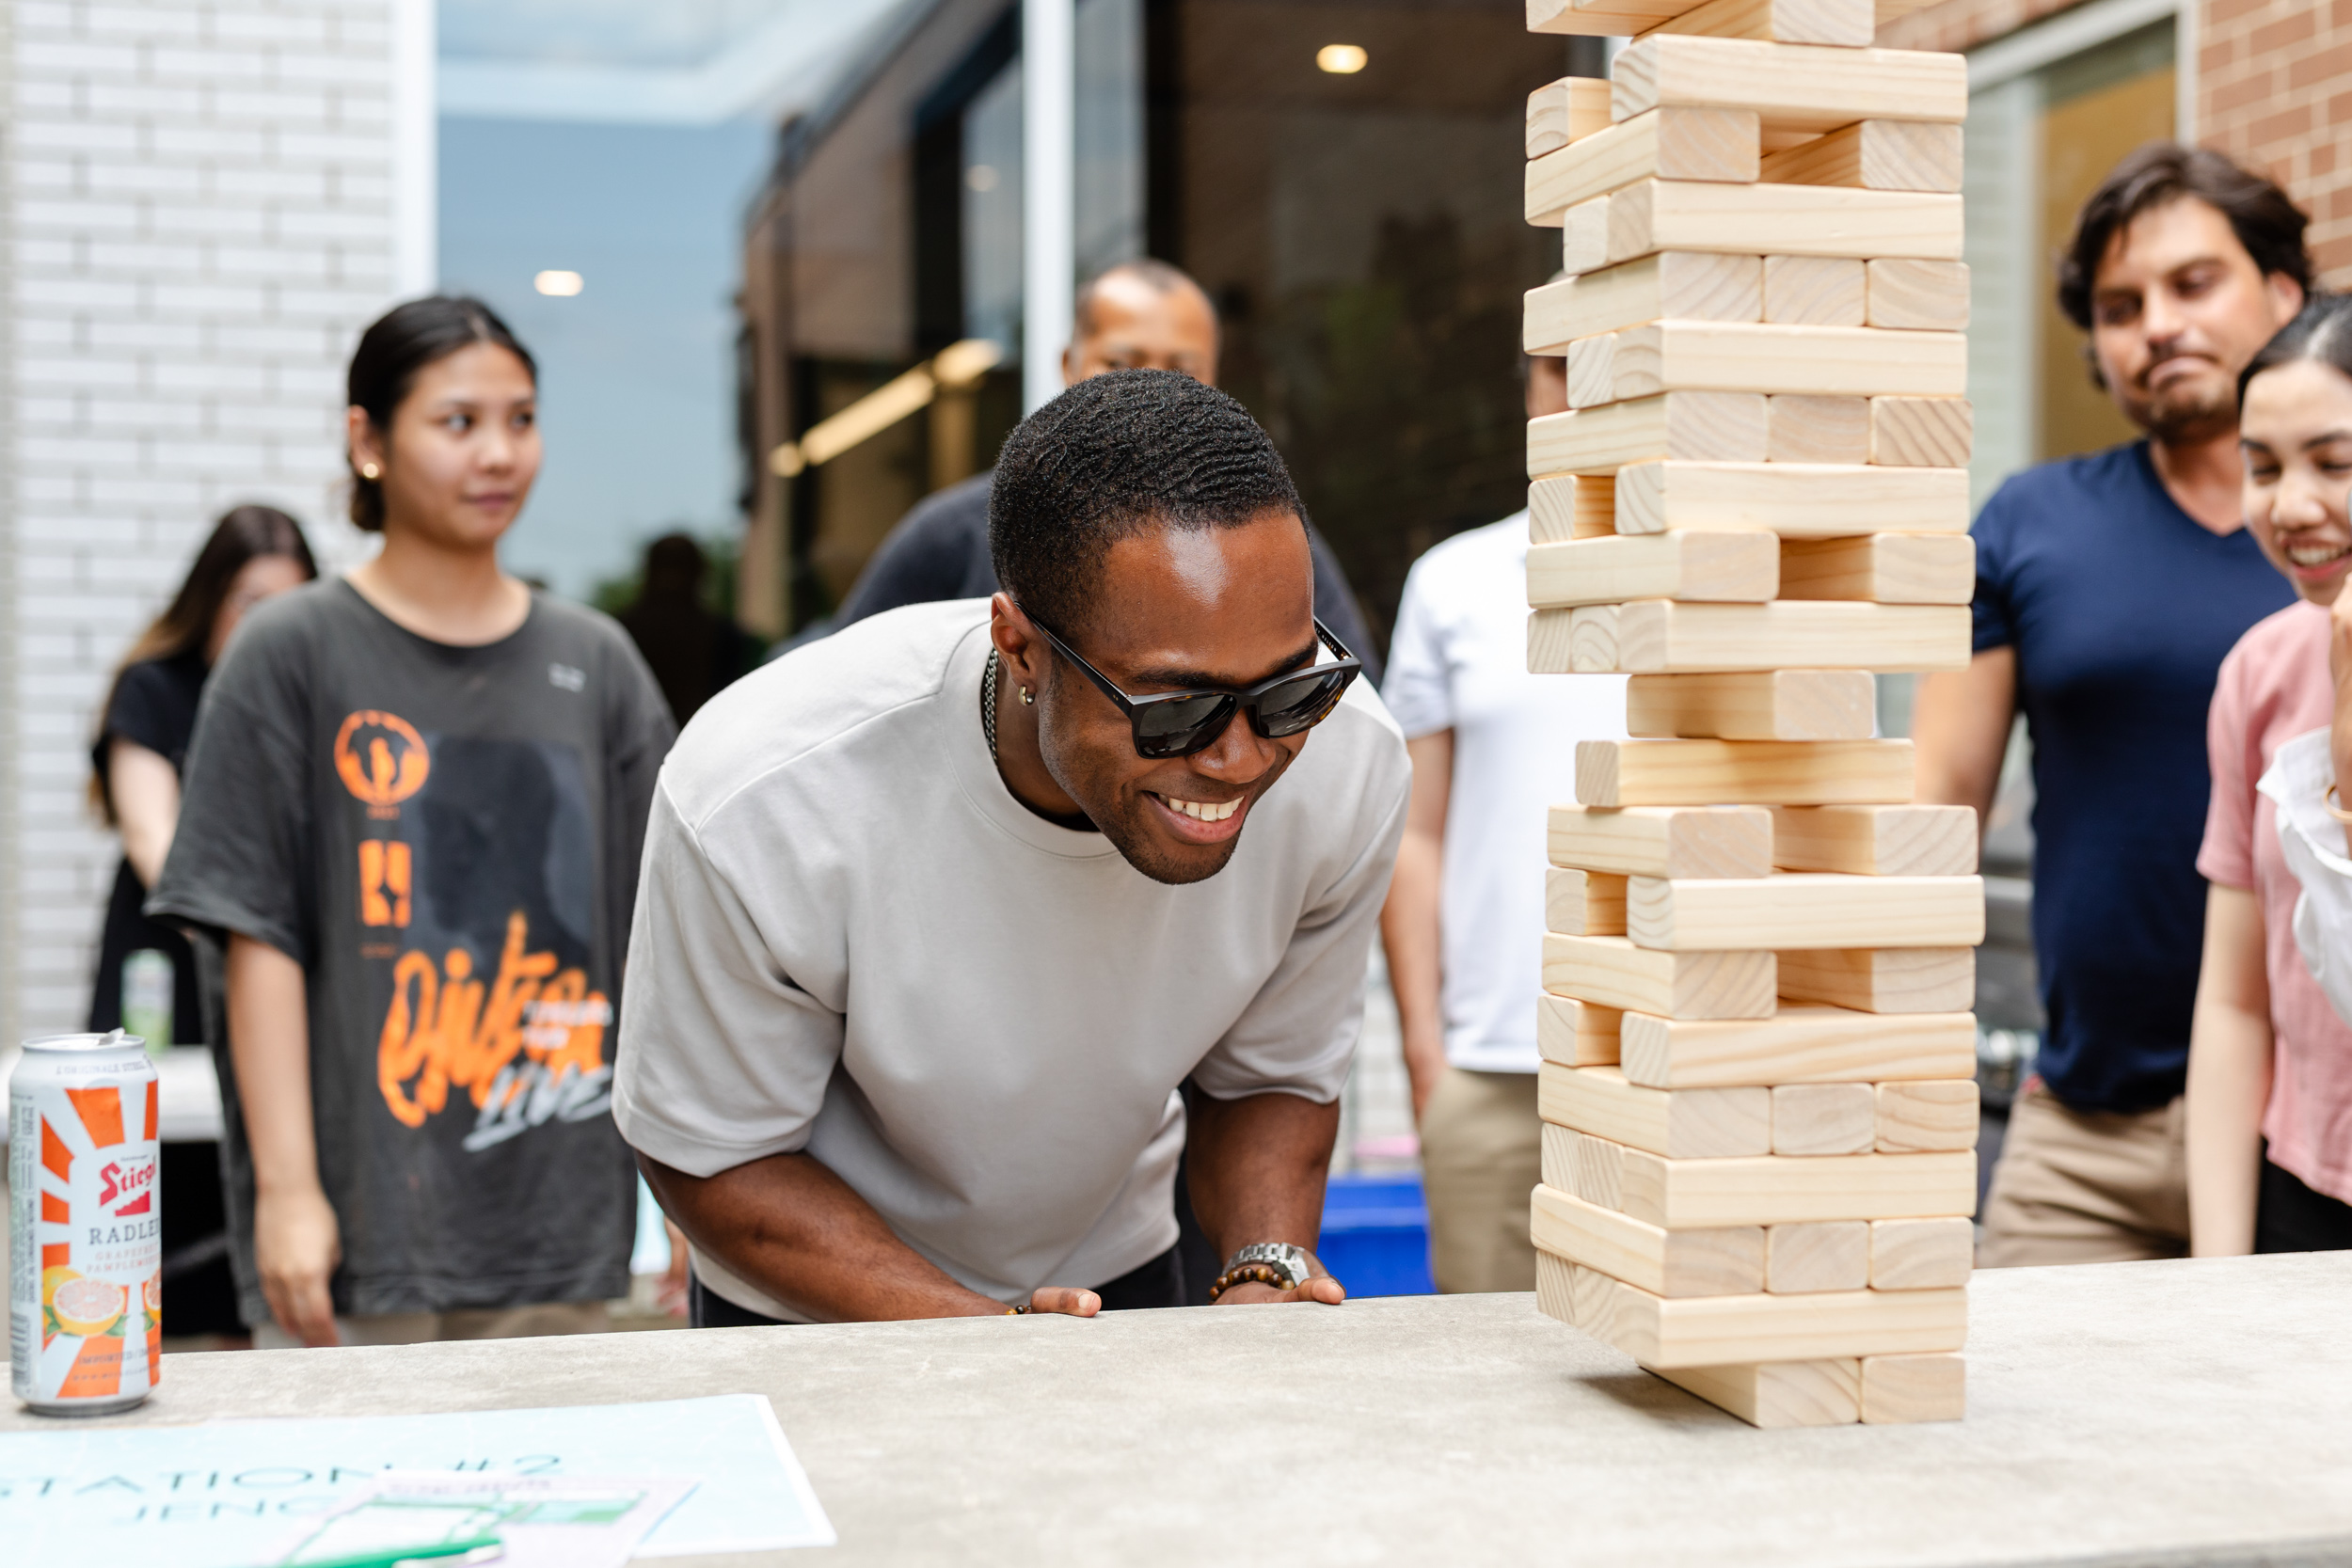 Social event involving people playing Jenga captured by photography.